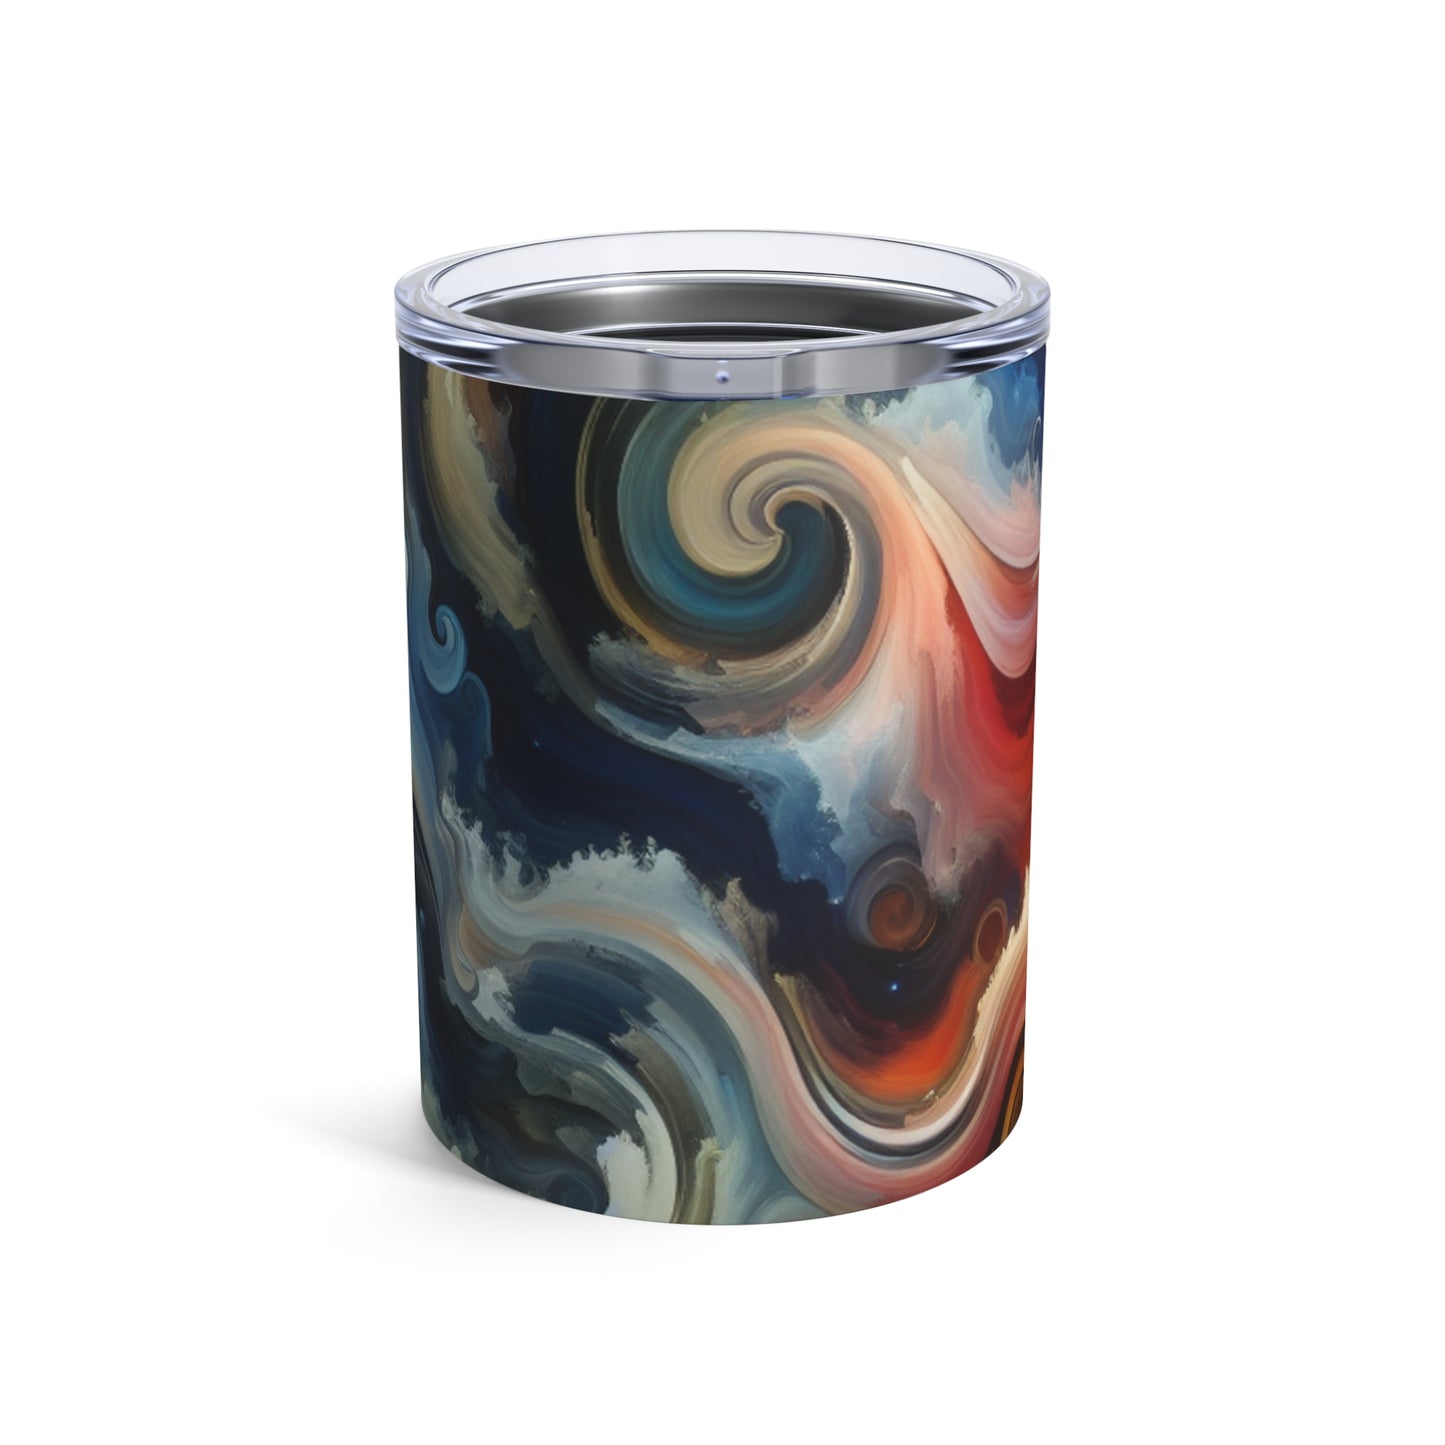 "Chaotic Balance: A Universe of Color" - The Alien Tumbler 10oz Abstract Art Style